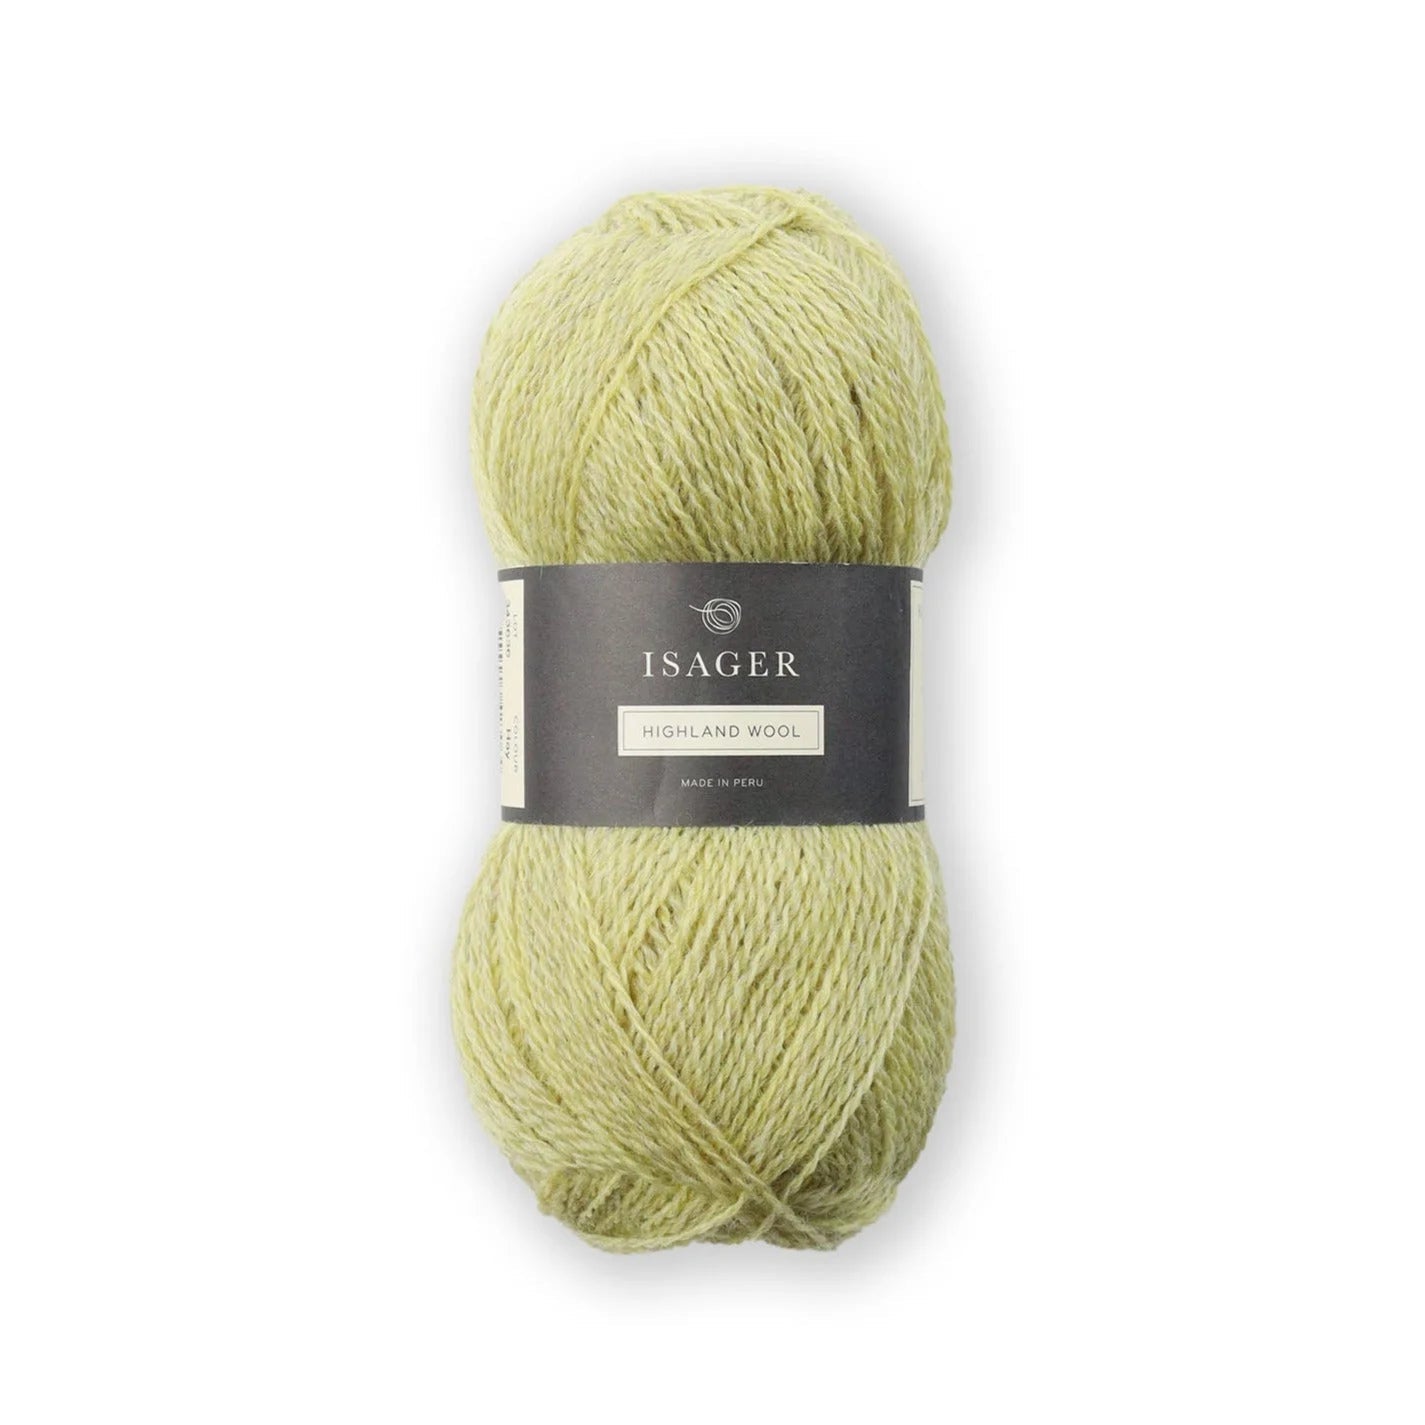 Isager Highland - Hay - 4 Ply - Isager - The Little Yarn Store